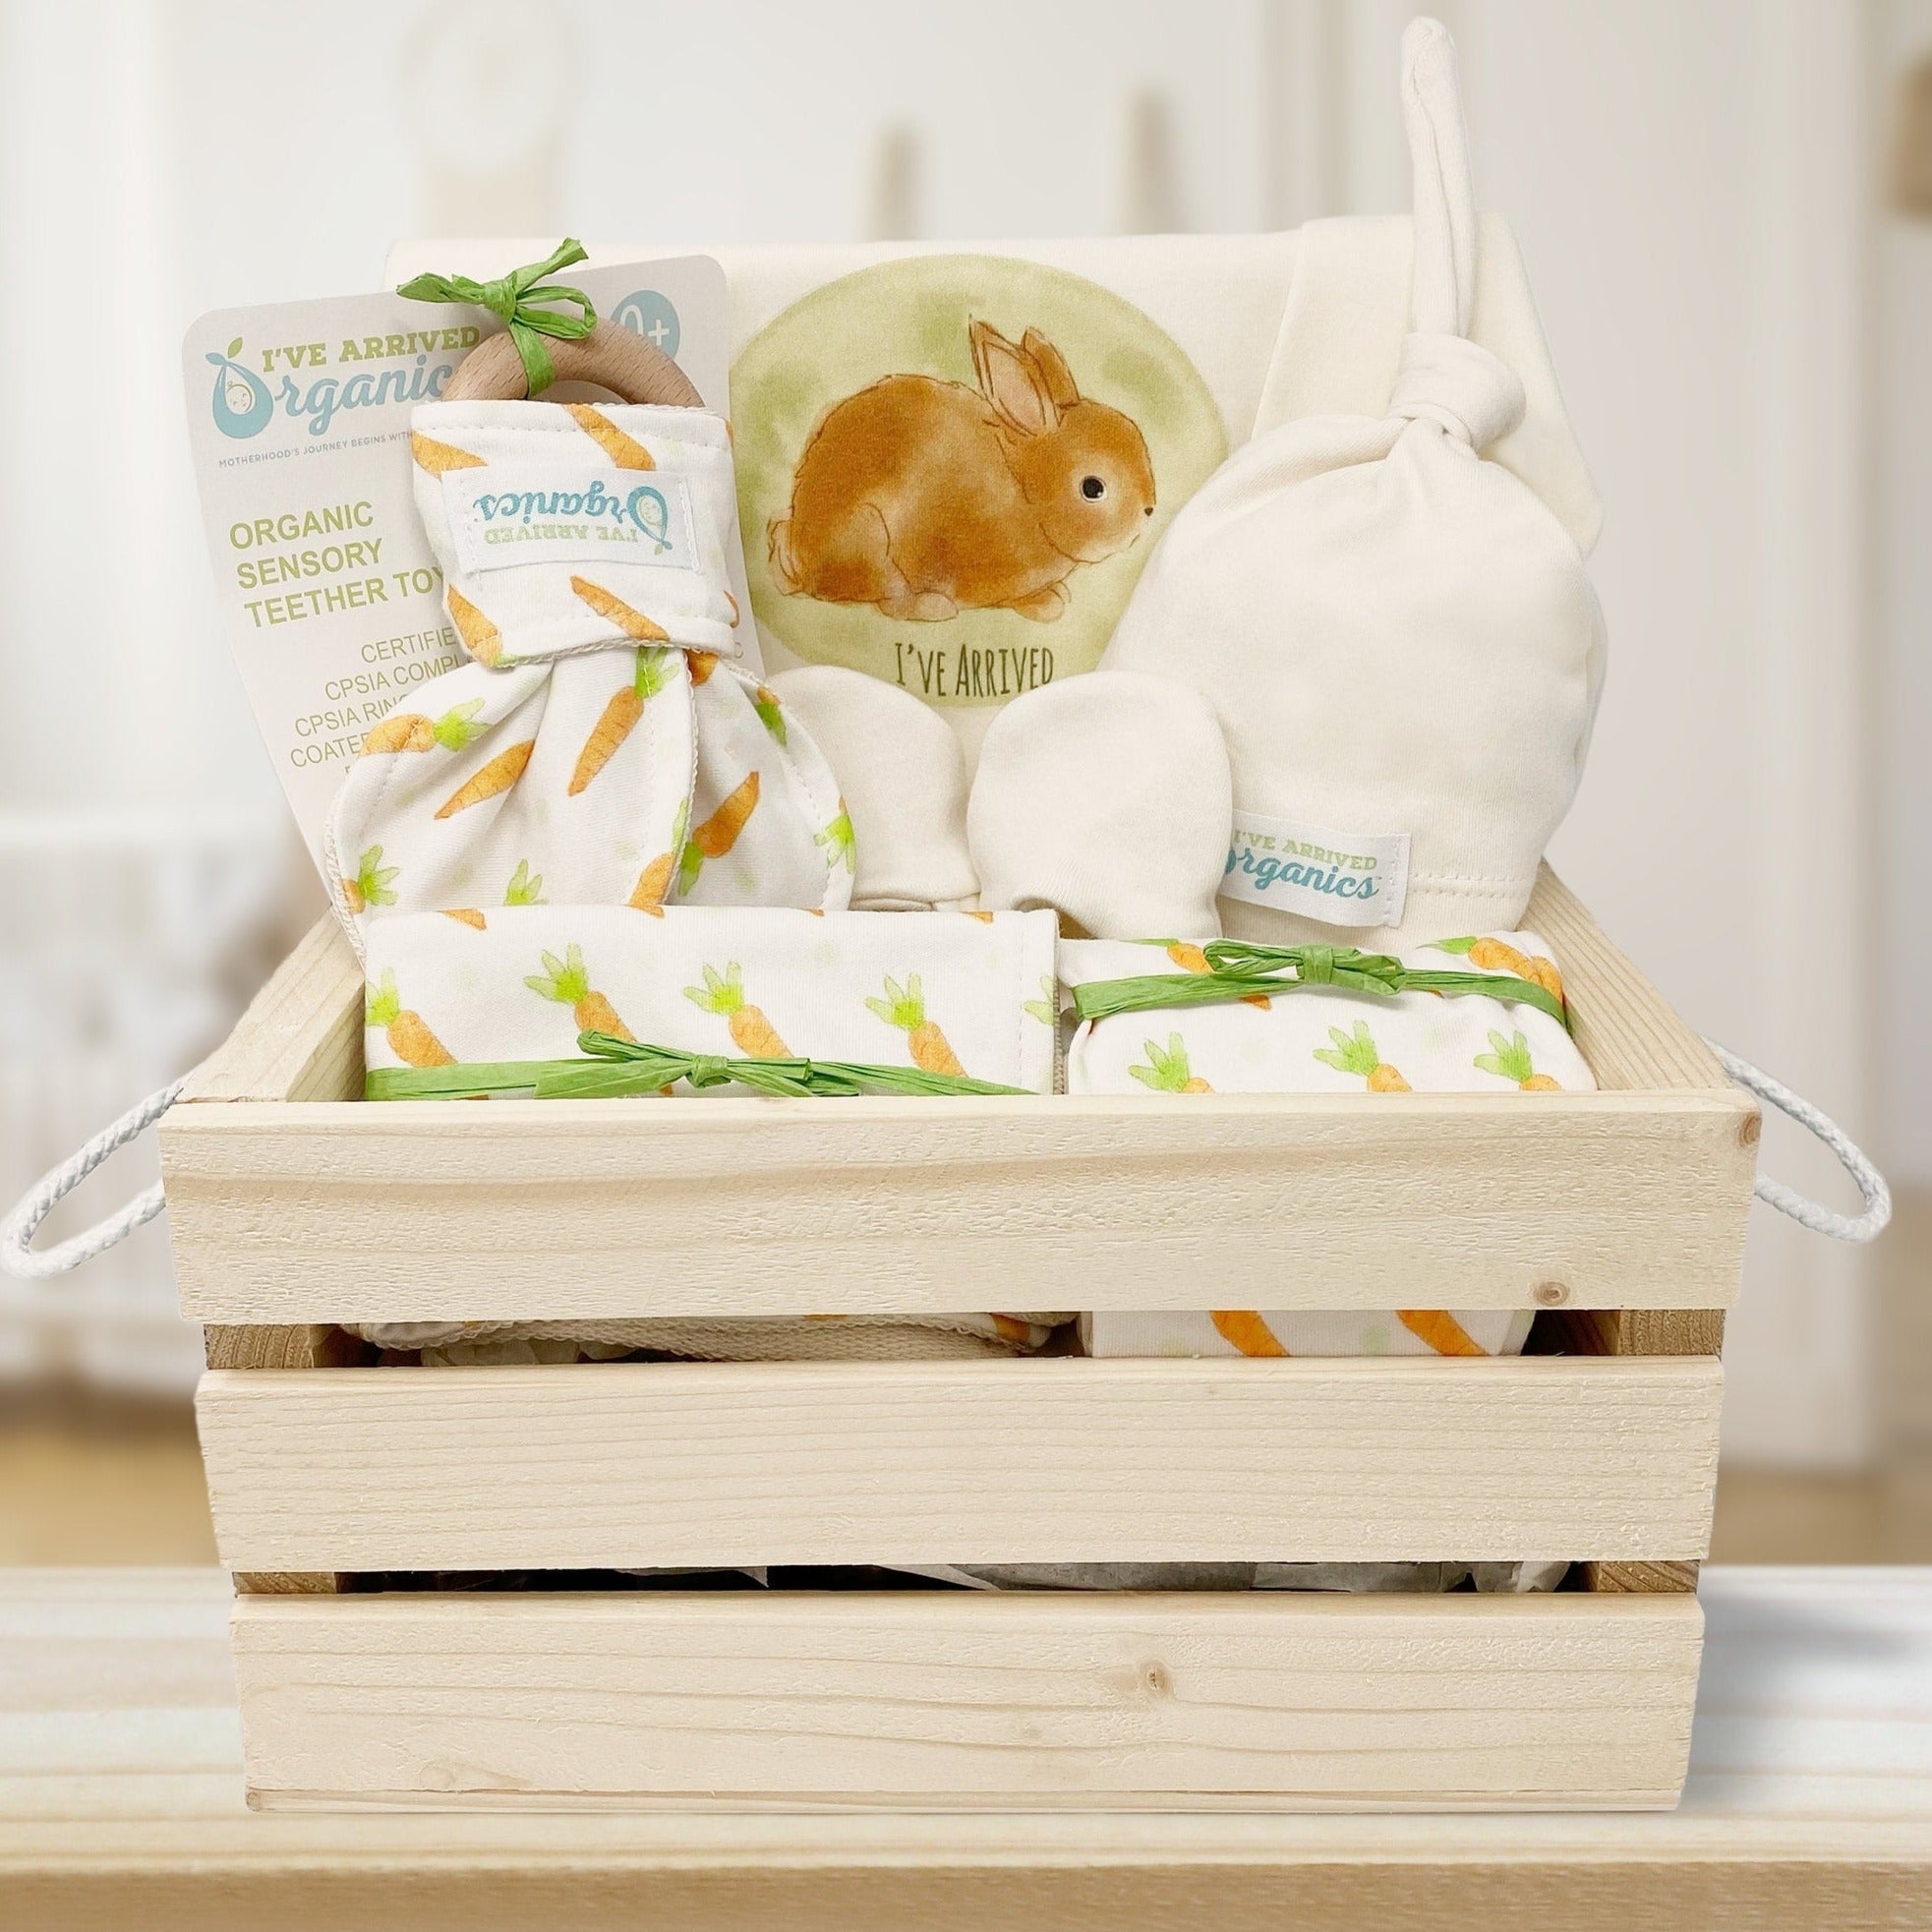 Unisex Baby Gift Hampers, Baskets and Packed Keepsake Boxes | UK Supplier –  Unique Baby Gift Baskets